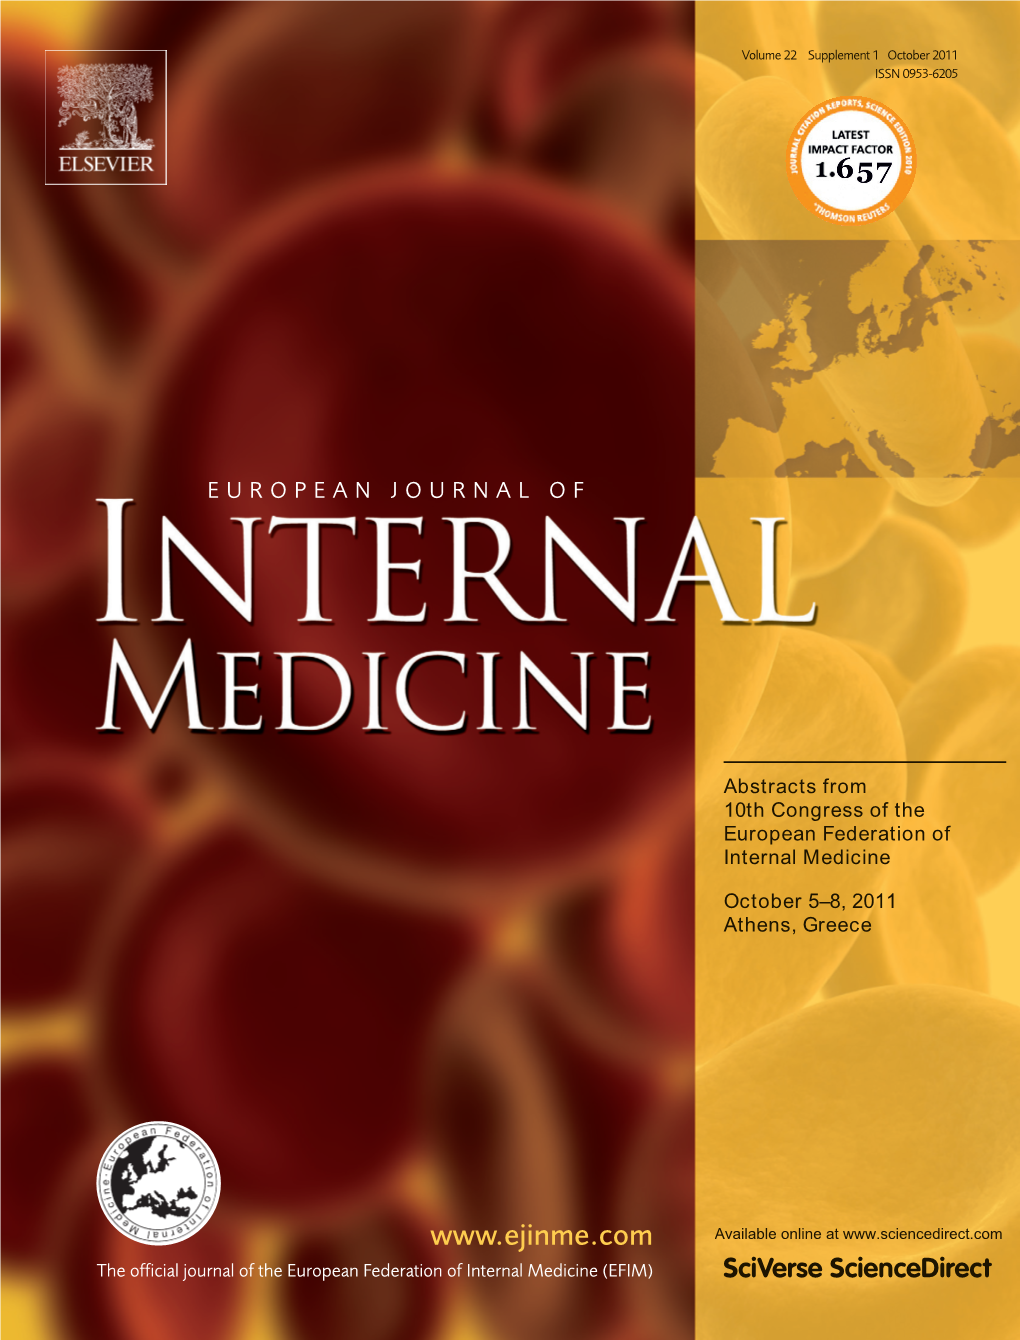 Available Online at the Official Journal of the European Federation of Internal Medicine (EFIM) EUROPEAN JOURNAL OF